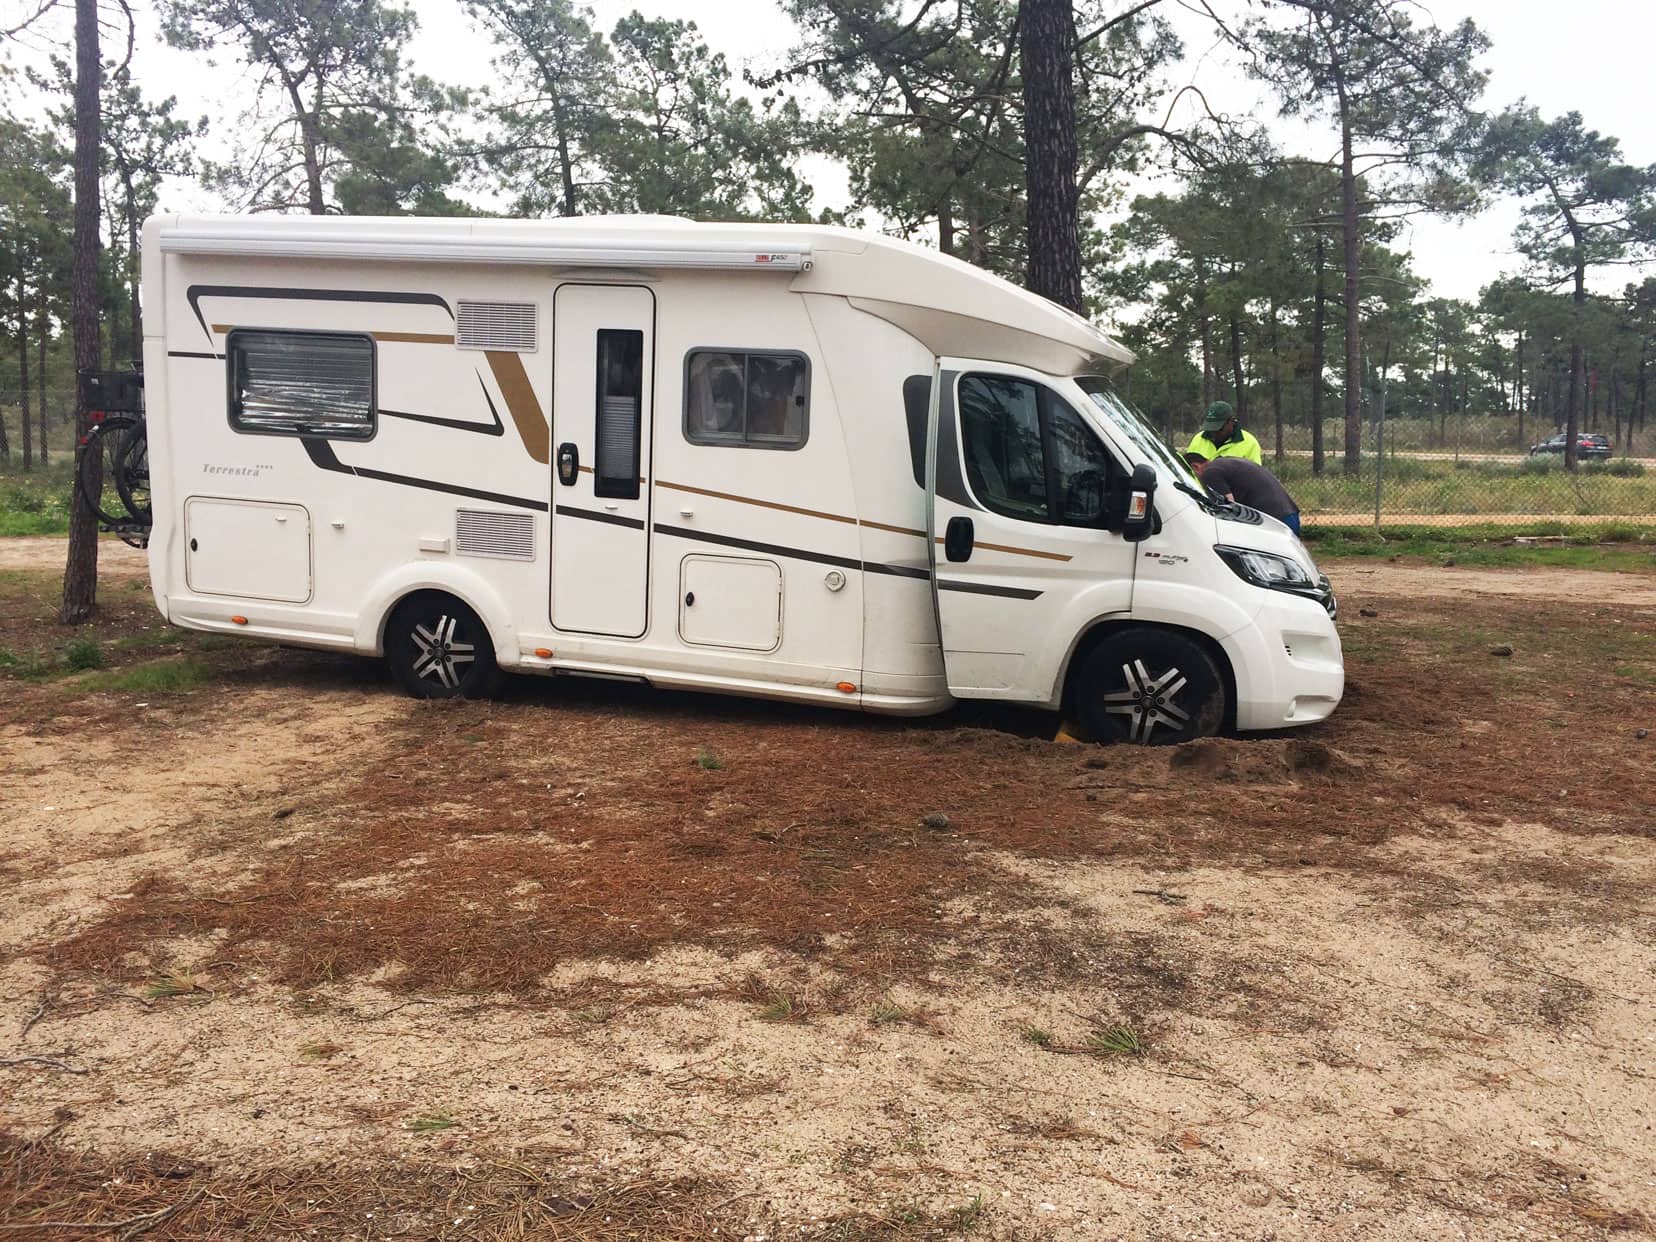 Our motorhome bogged  in a campsite in Spain